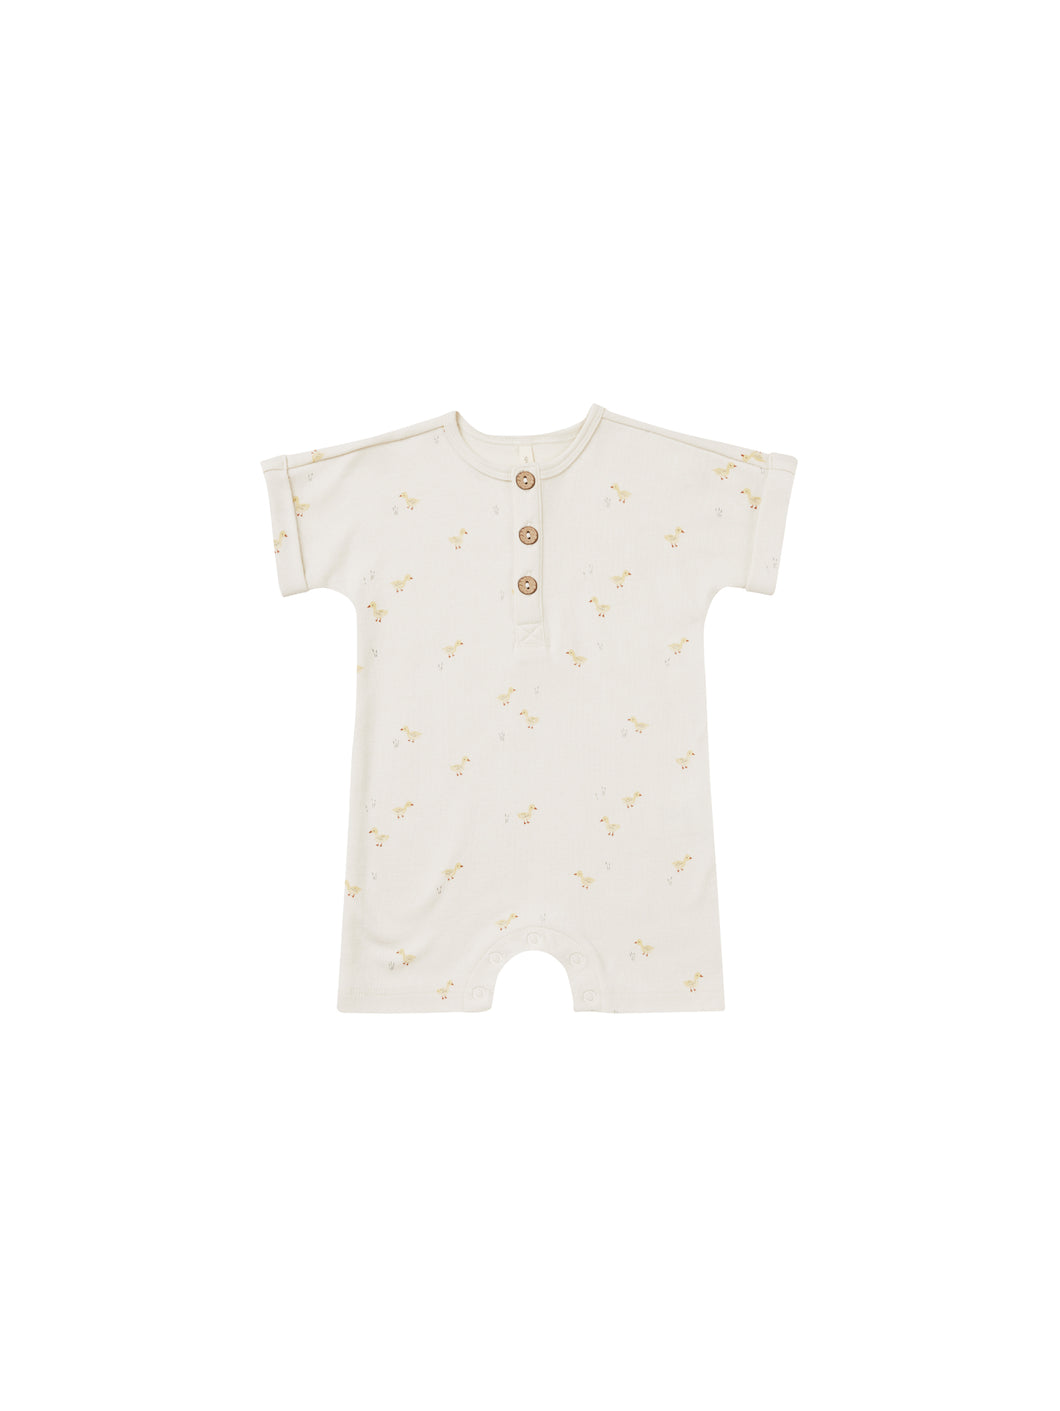 Ivory Romper with three buttons down the middle and a Duck all over print. 